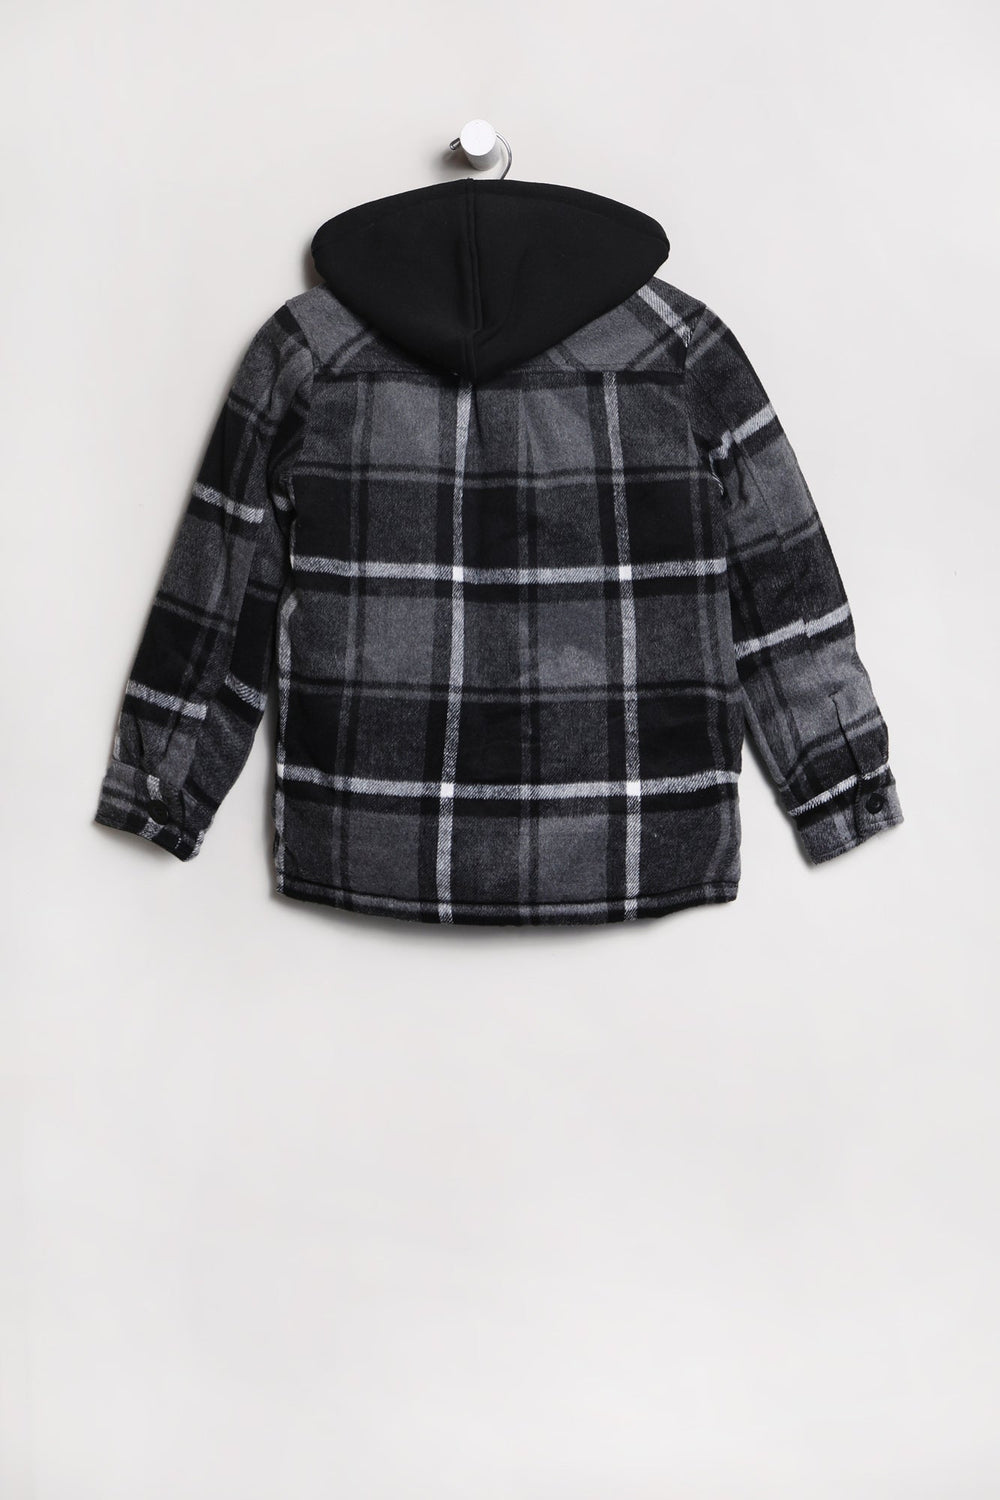 West49 Youth Lined Flannel Shacket Black